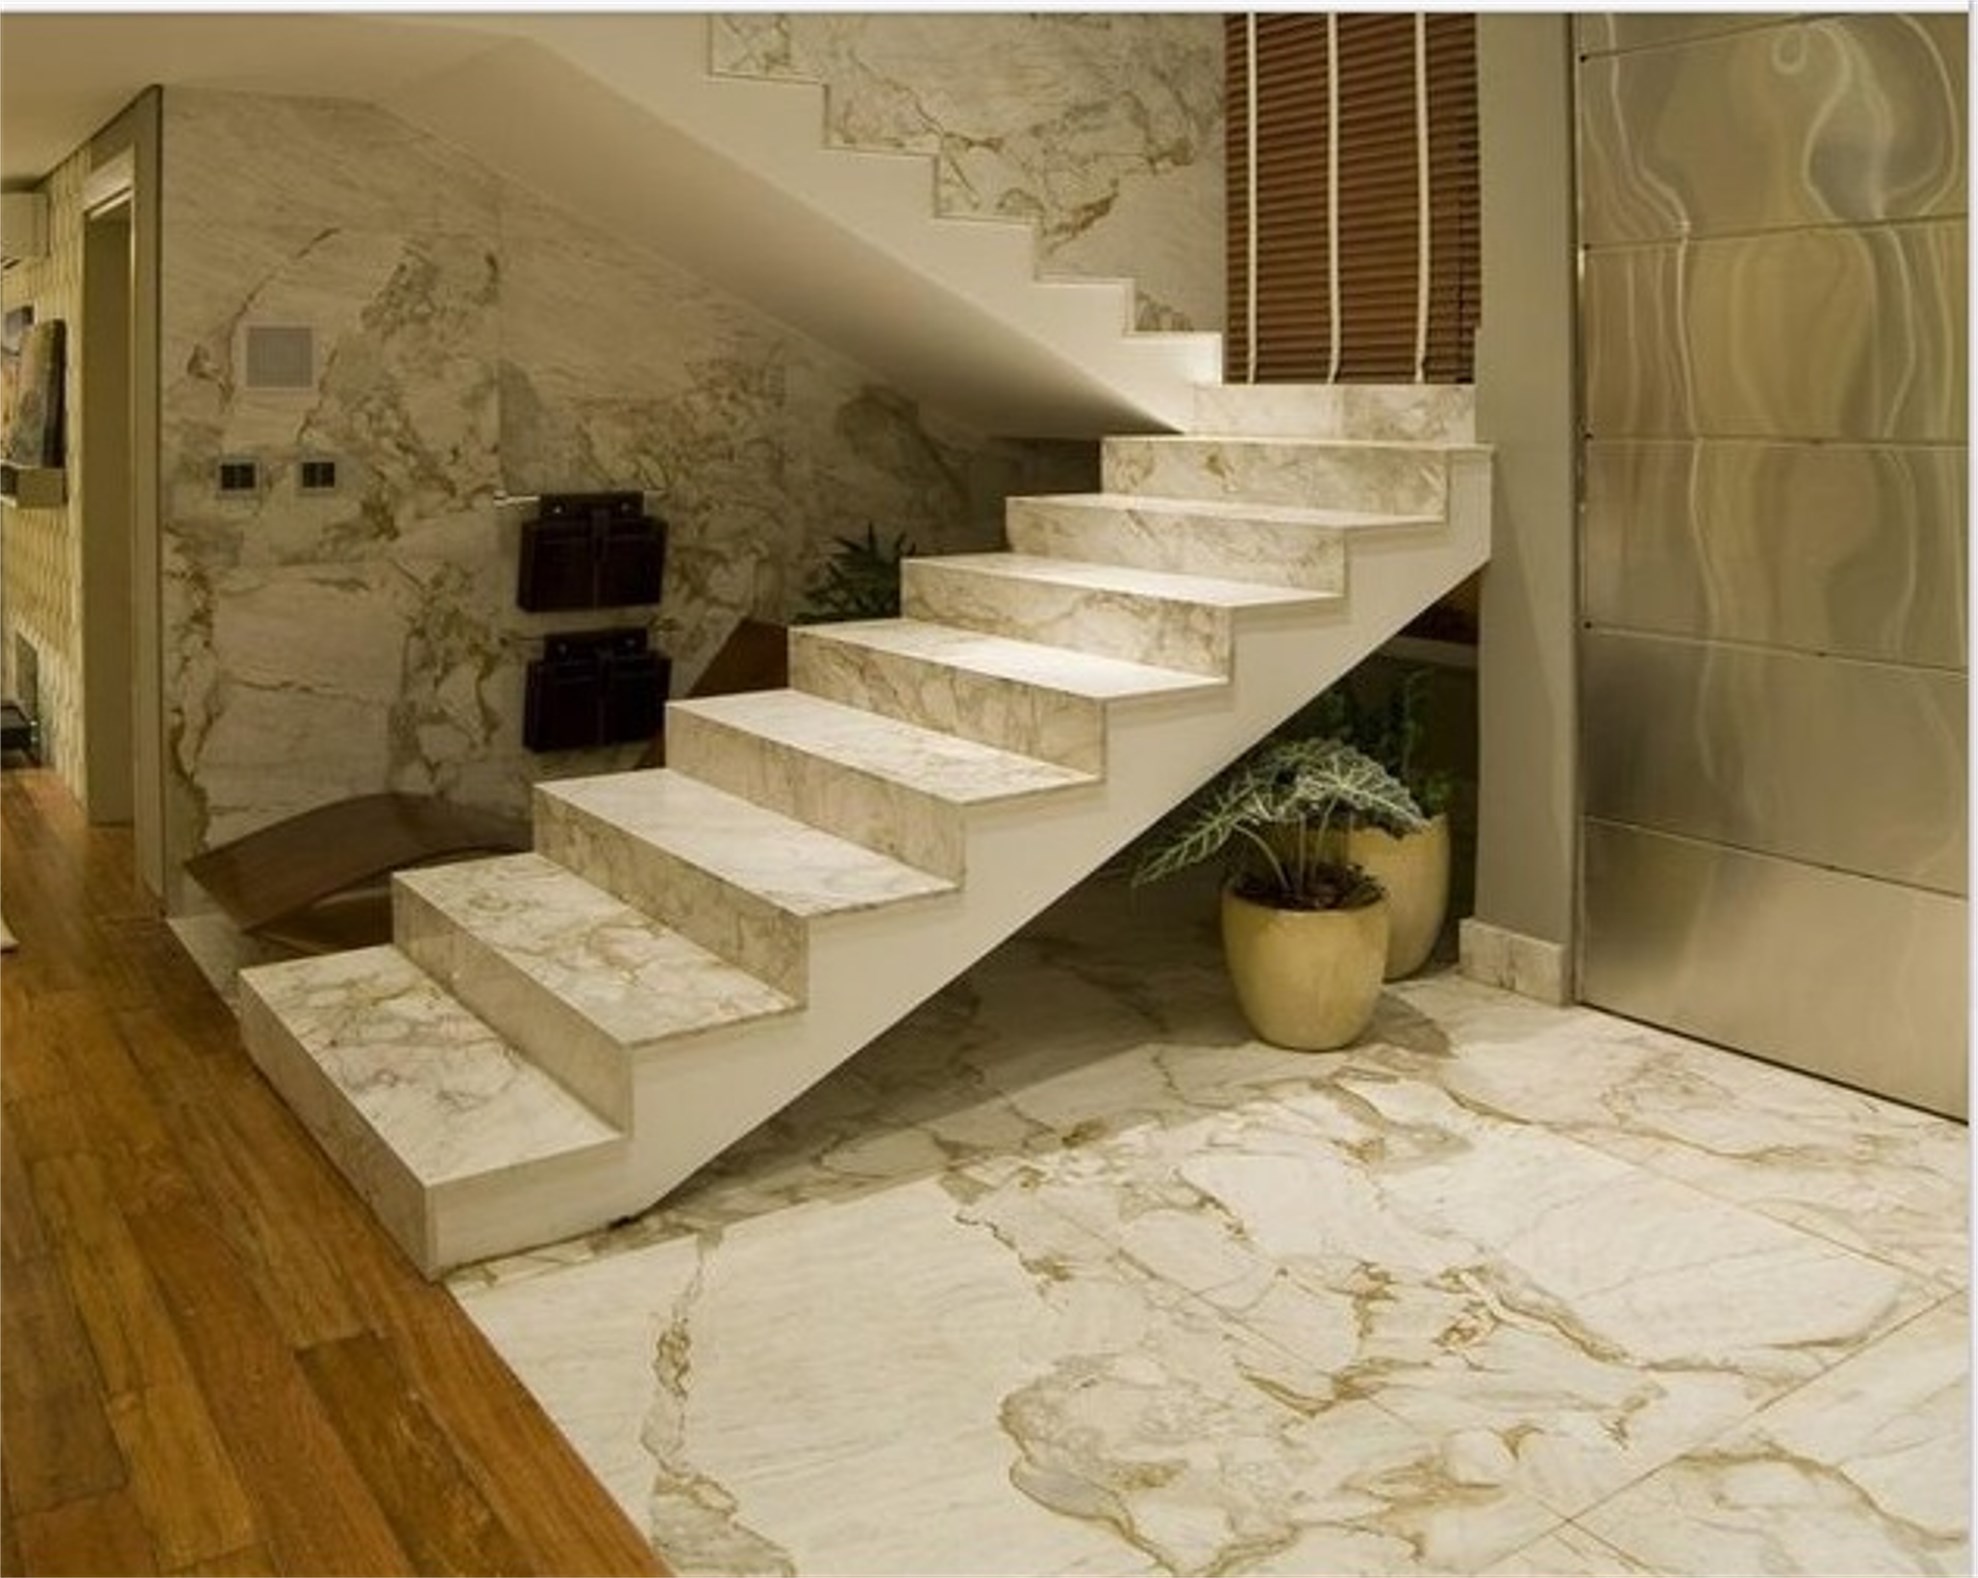 Part 1: Polished, Honed, and Tumbled Finishes for Marble Floors